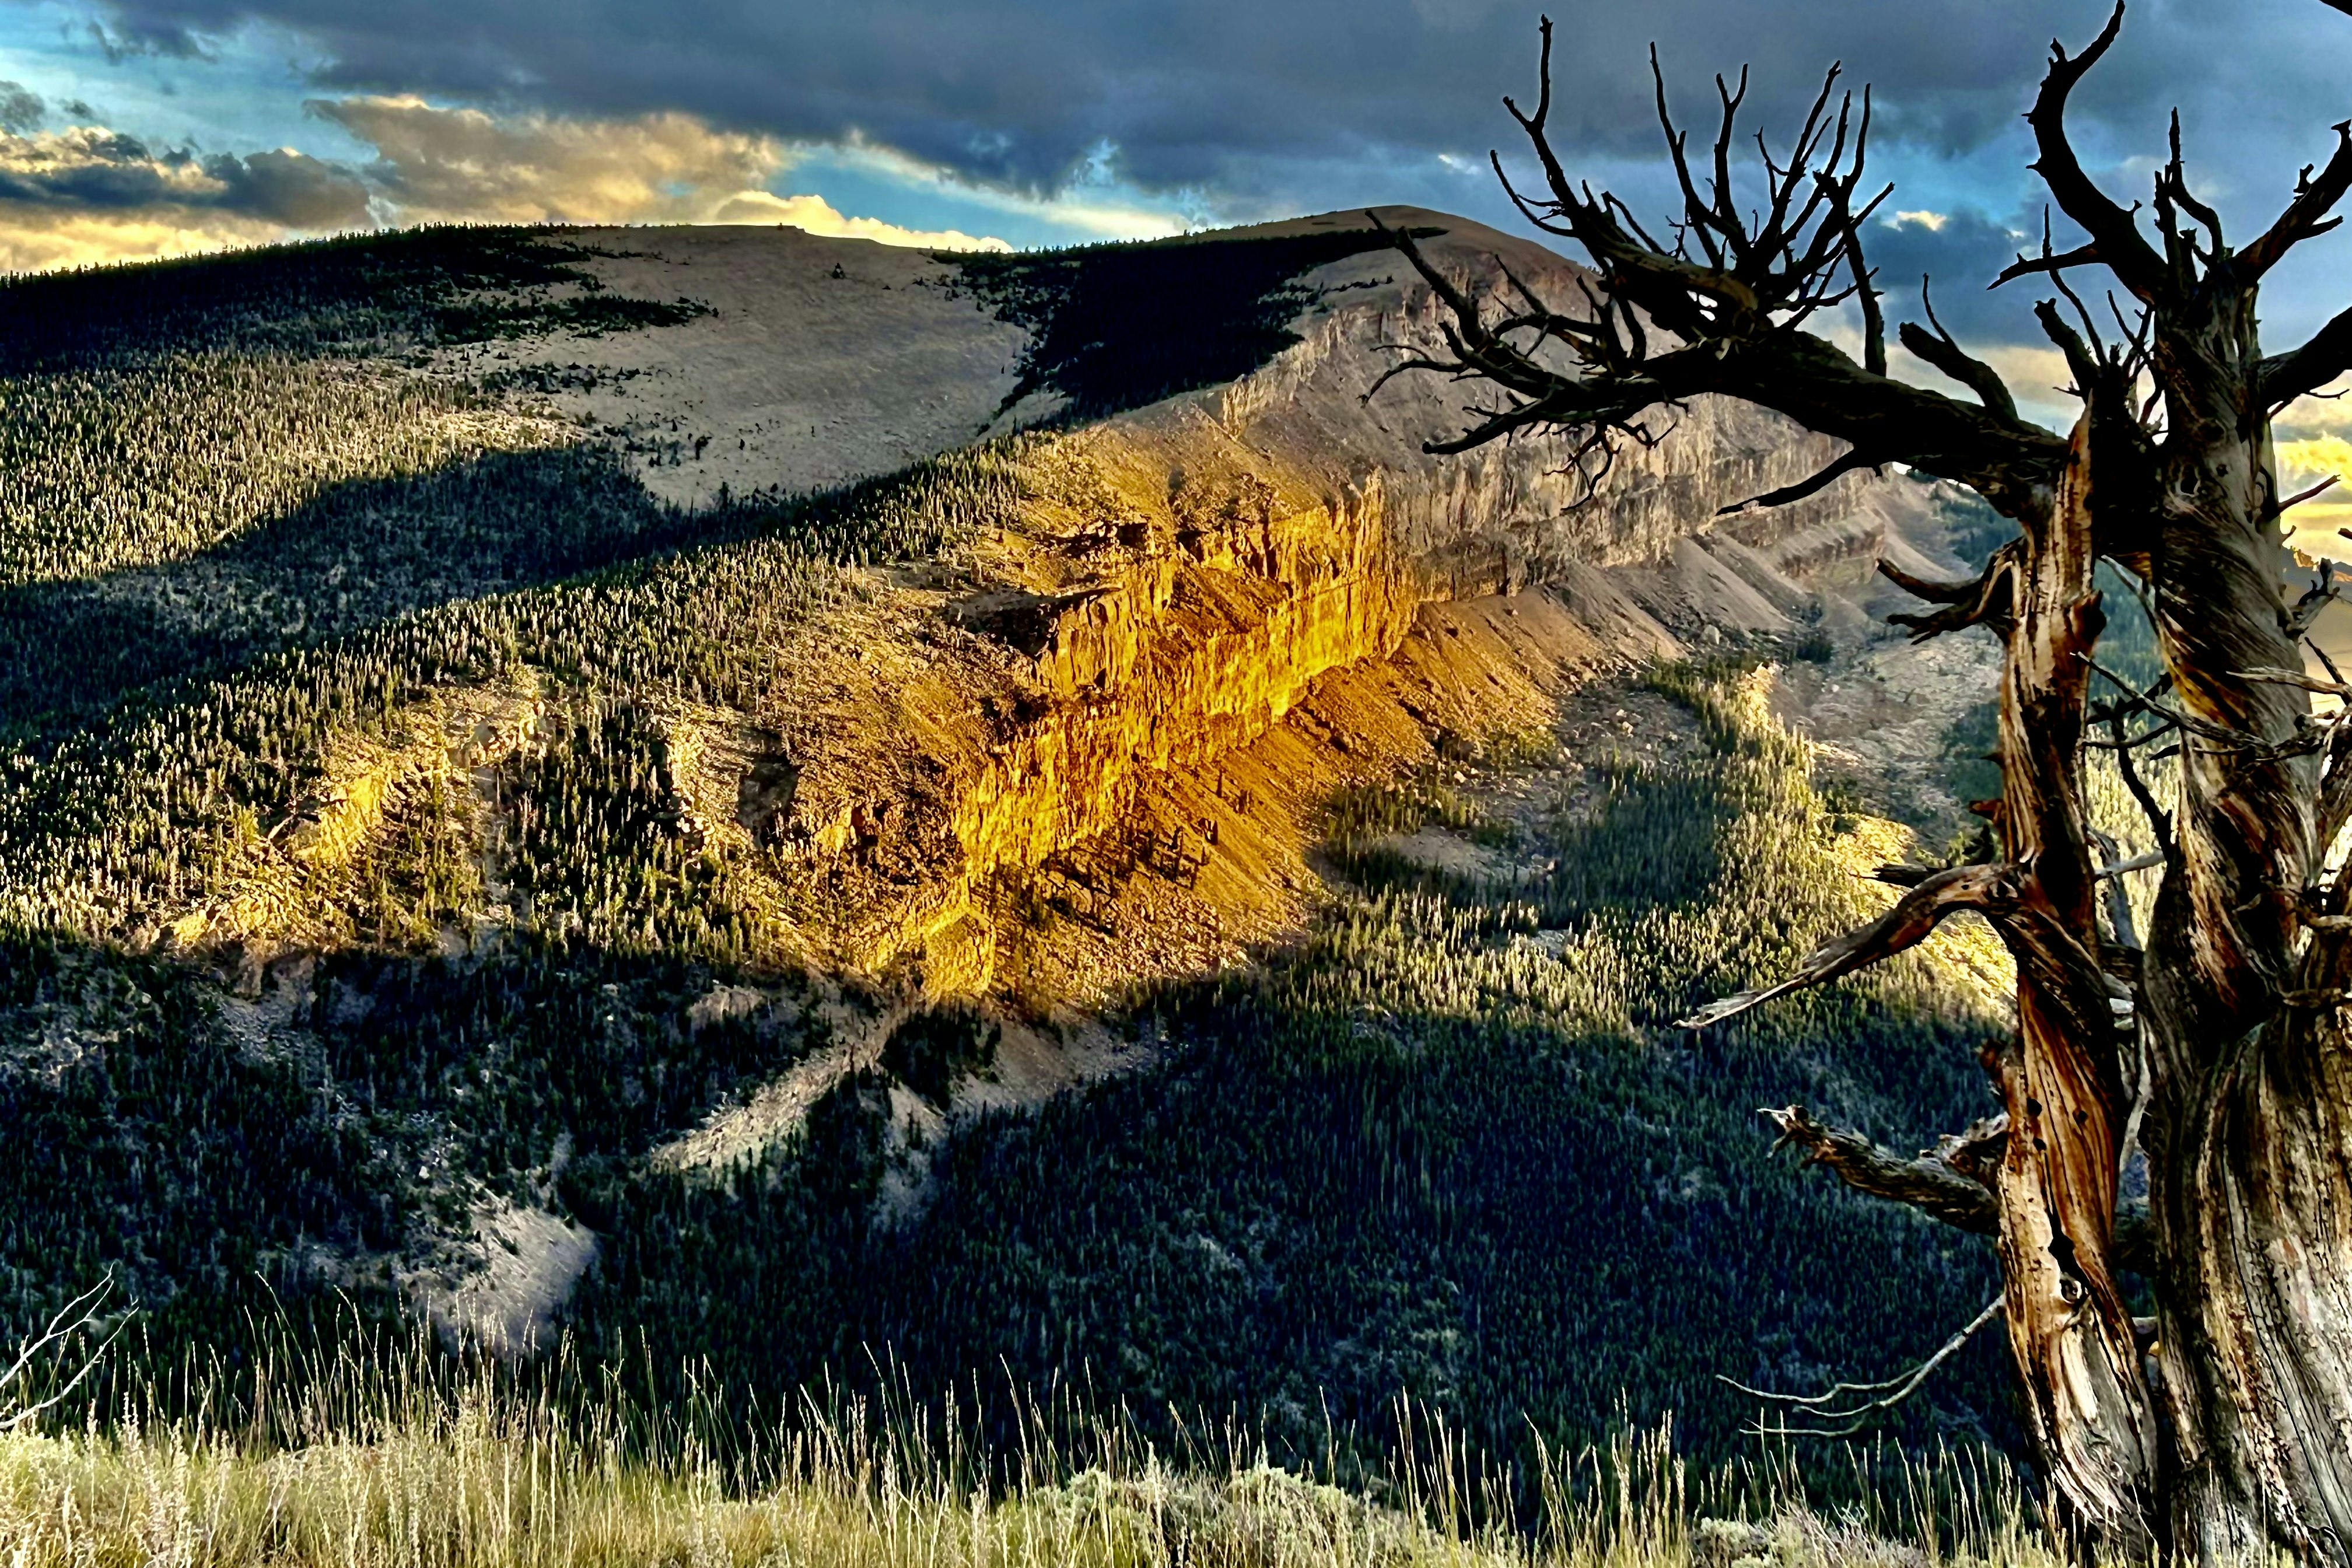 Sunset on Arrow Mountain in the Torrey Valley near Dubois, Wyoming.